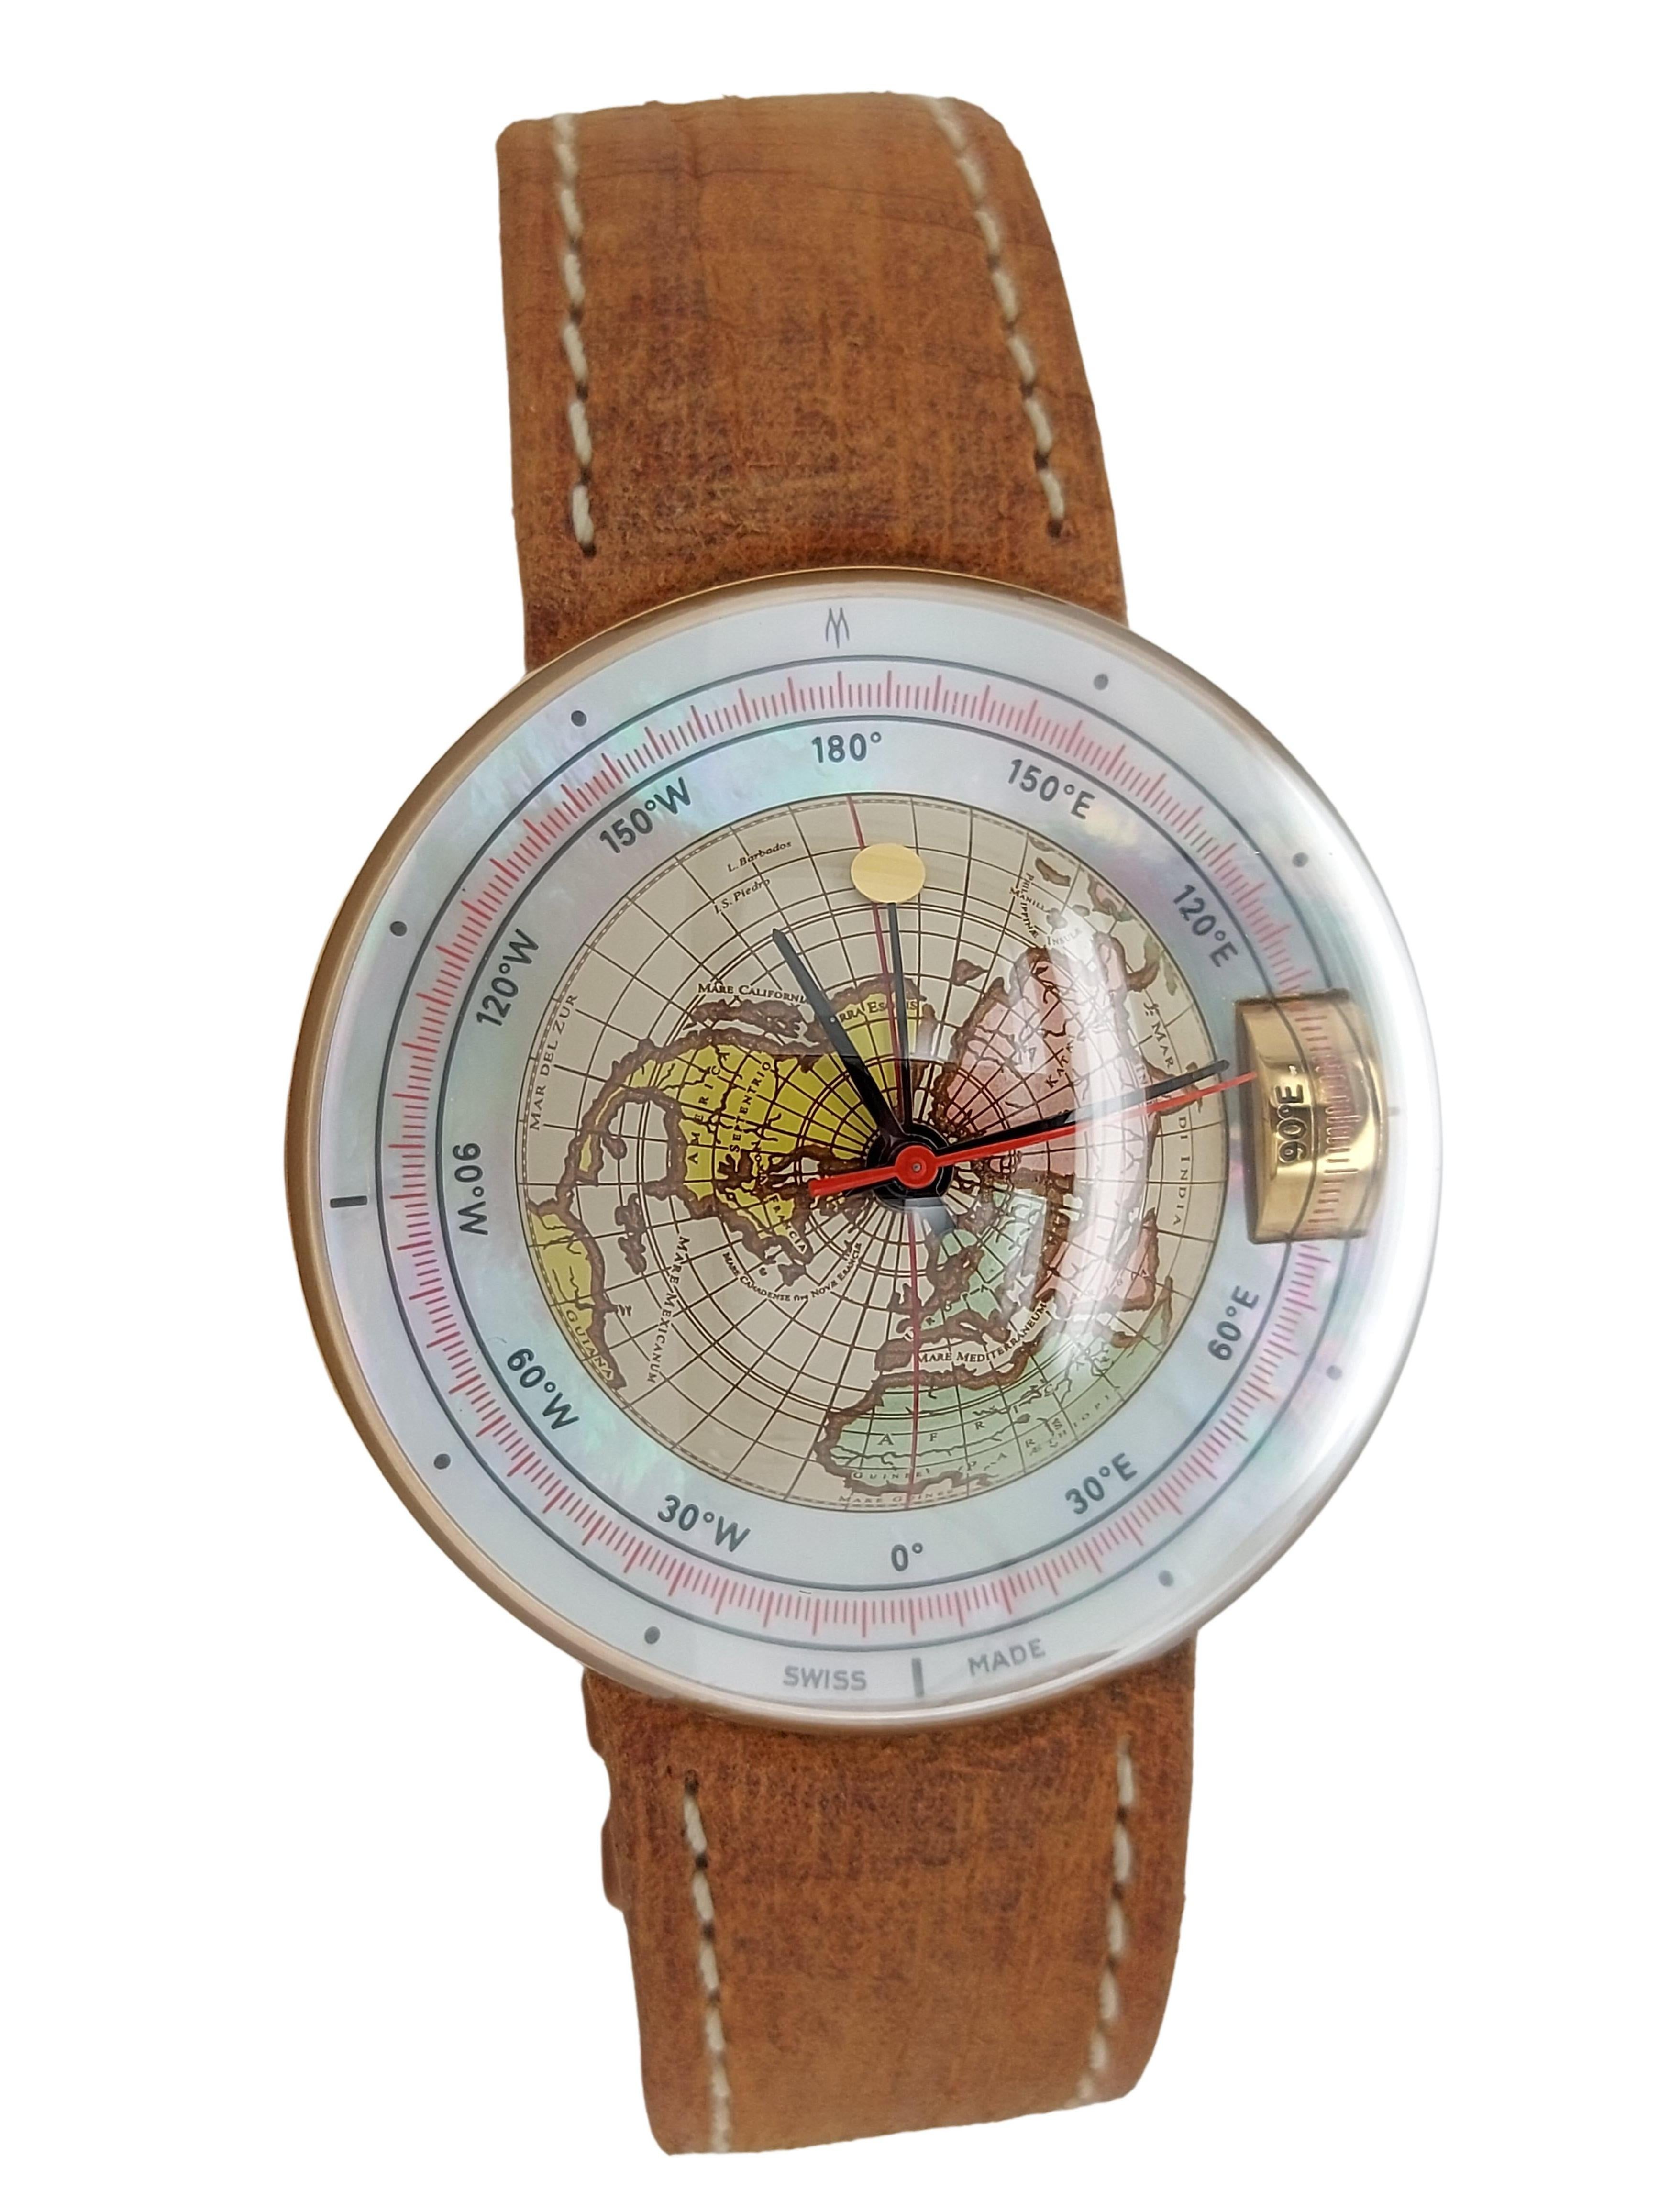 Very special Magellan world time clock depicting the 3D northern hemisphere!

Reference: 1521 NH

Movement: Automatic Self winding, Mechanical movement

Case: 18kt yellow gold, Case diameter 44 mm, Thickness 20 mm, Water Resistant 3ATM, The crown is